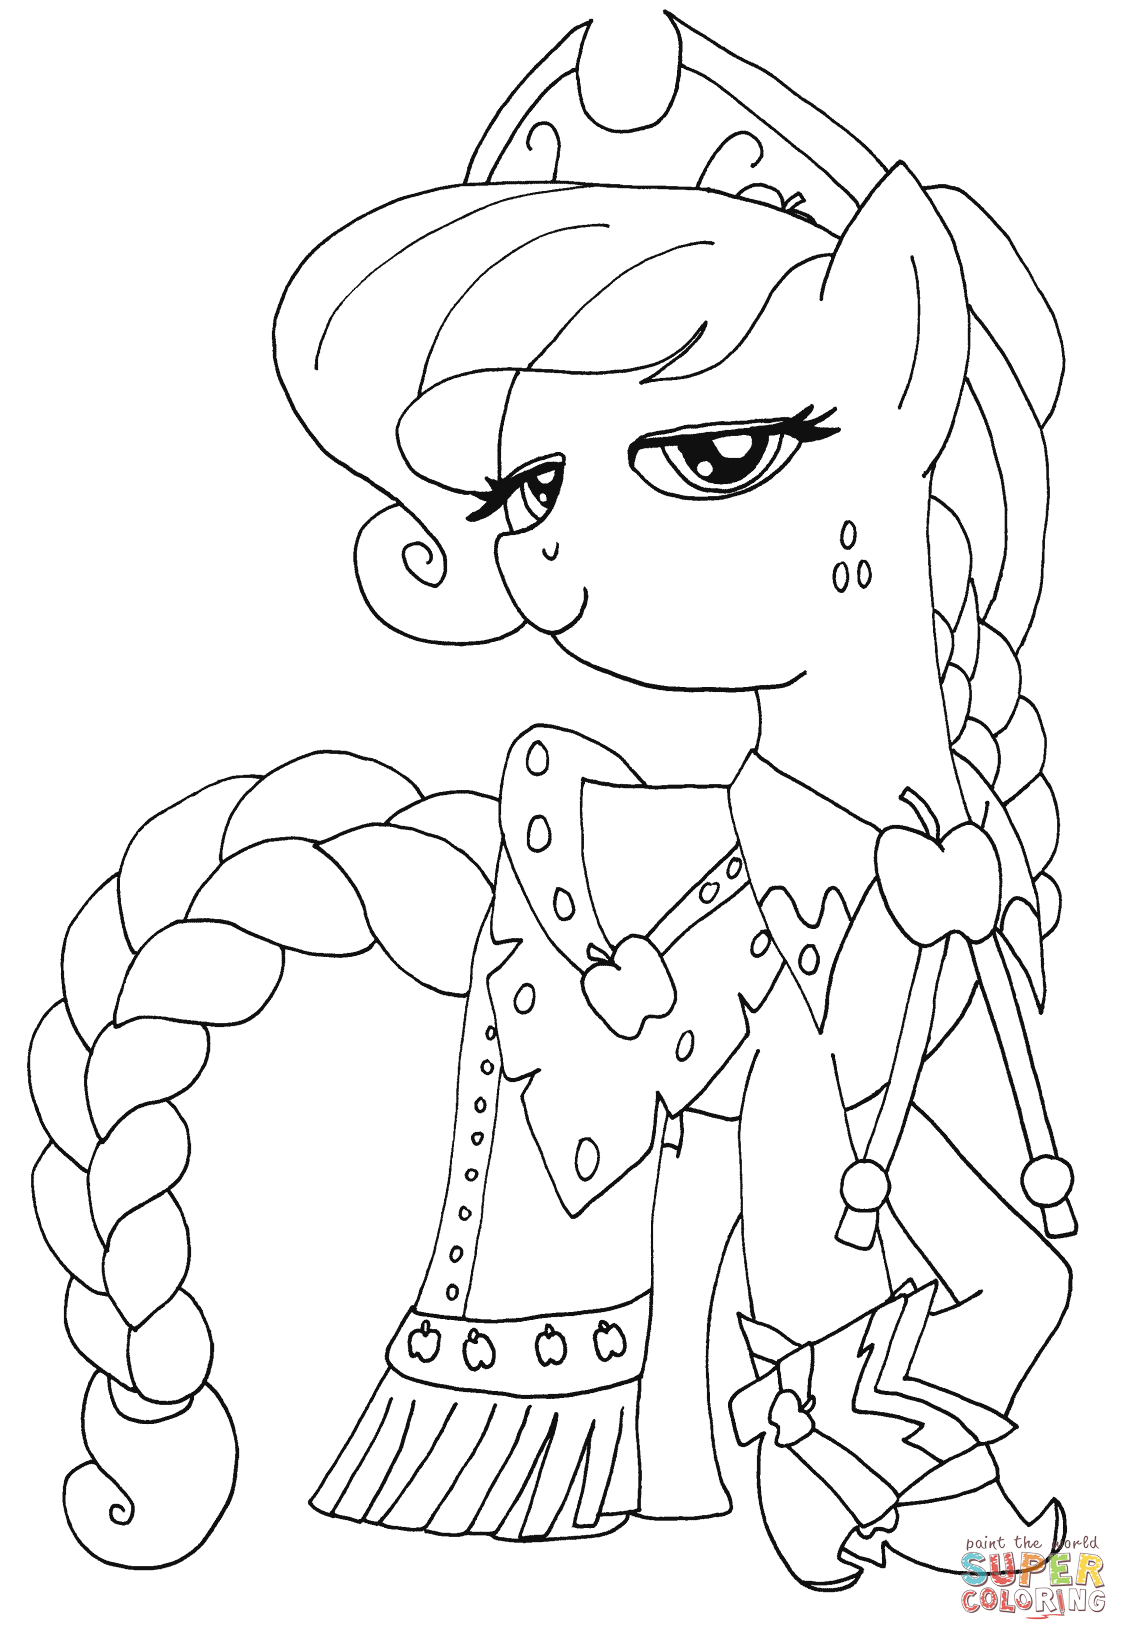 Princess Applejack from My Little Pony Coloring Page - My ...